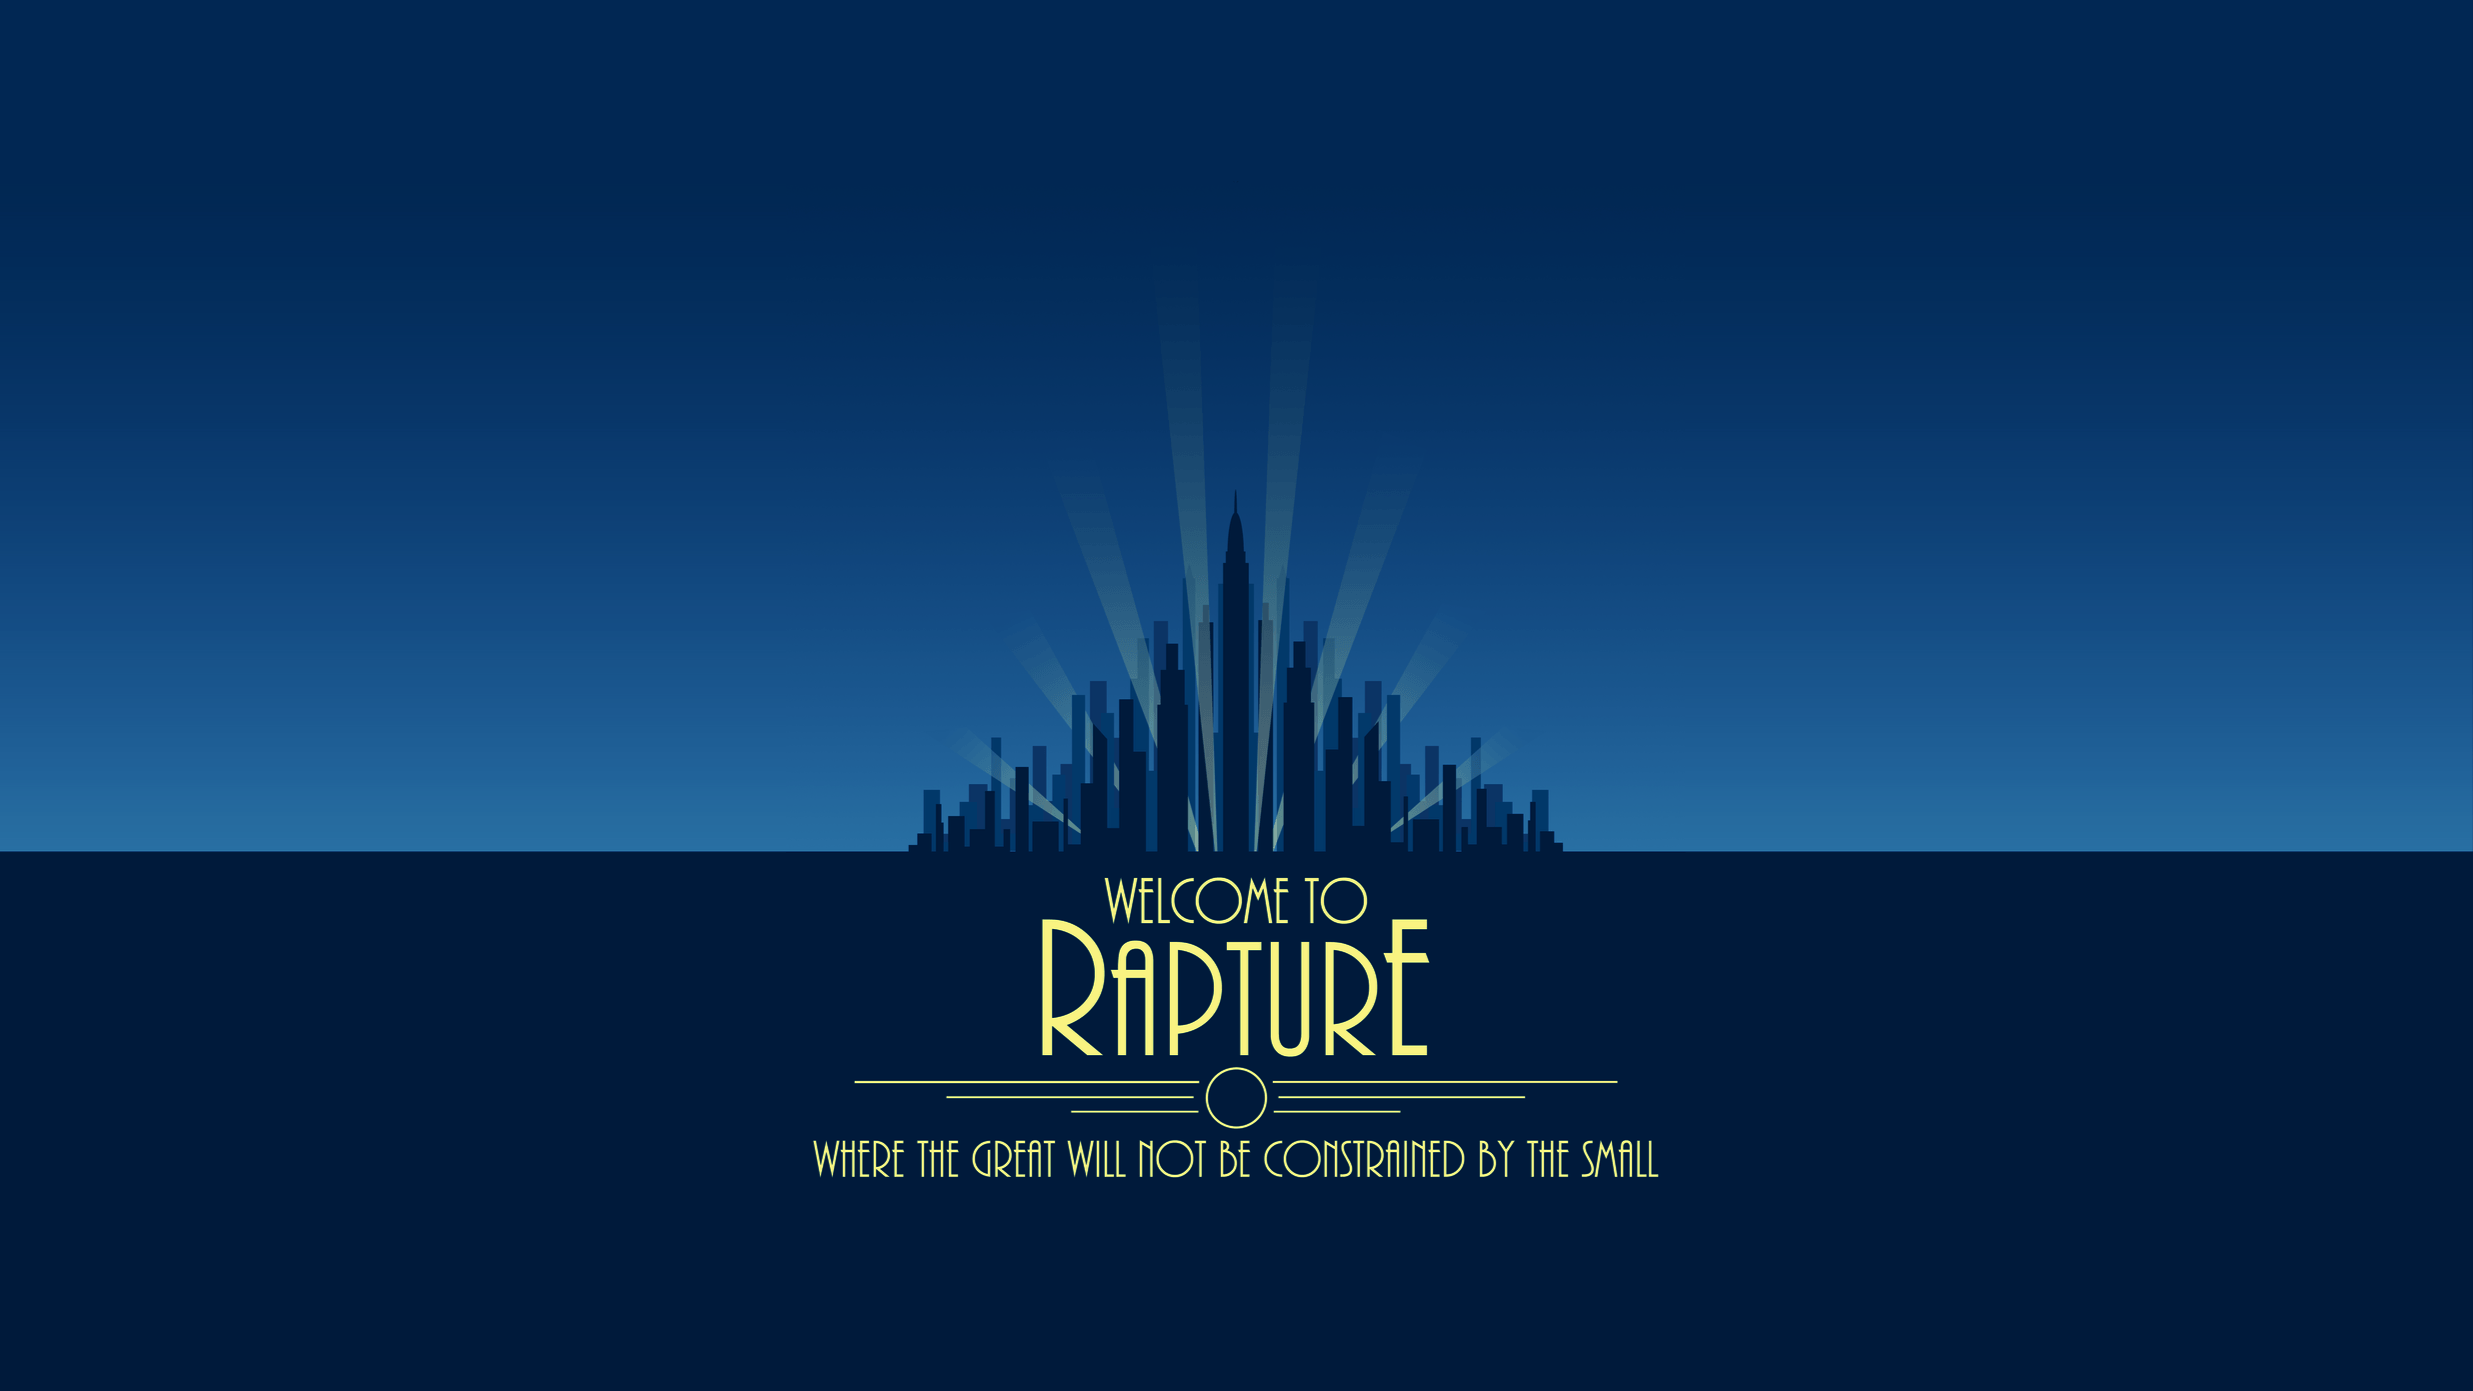 Rapture Wallpaper and Picture Collection